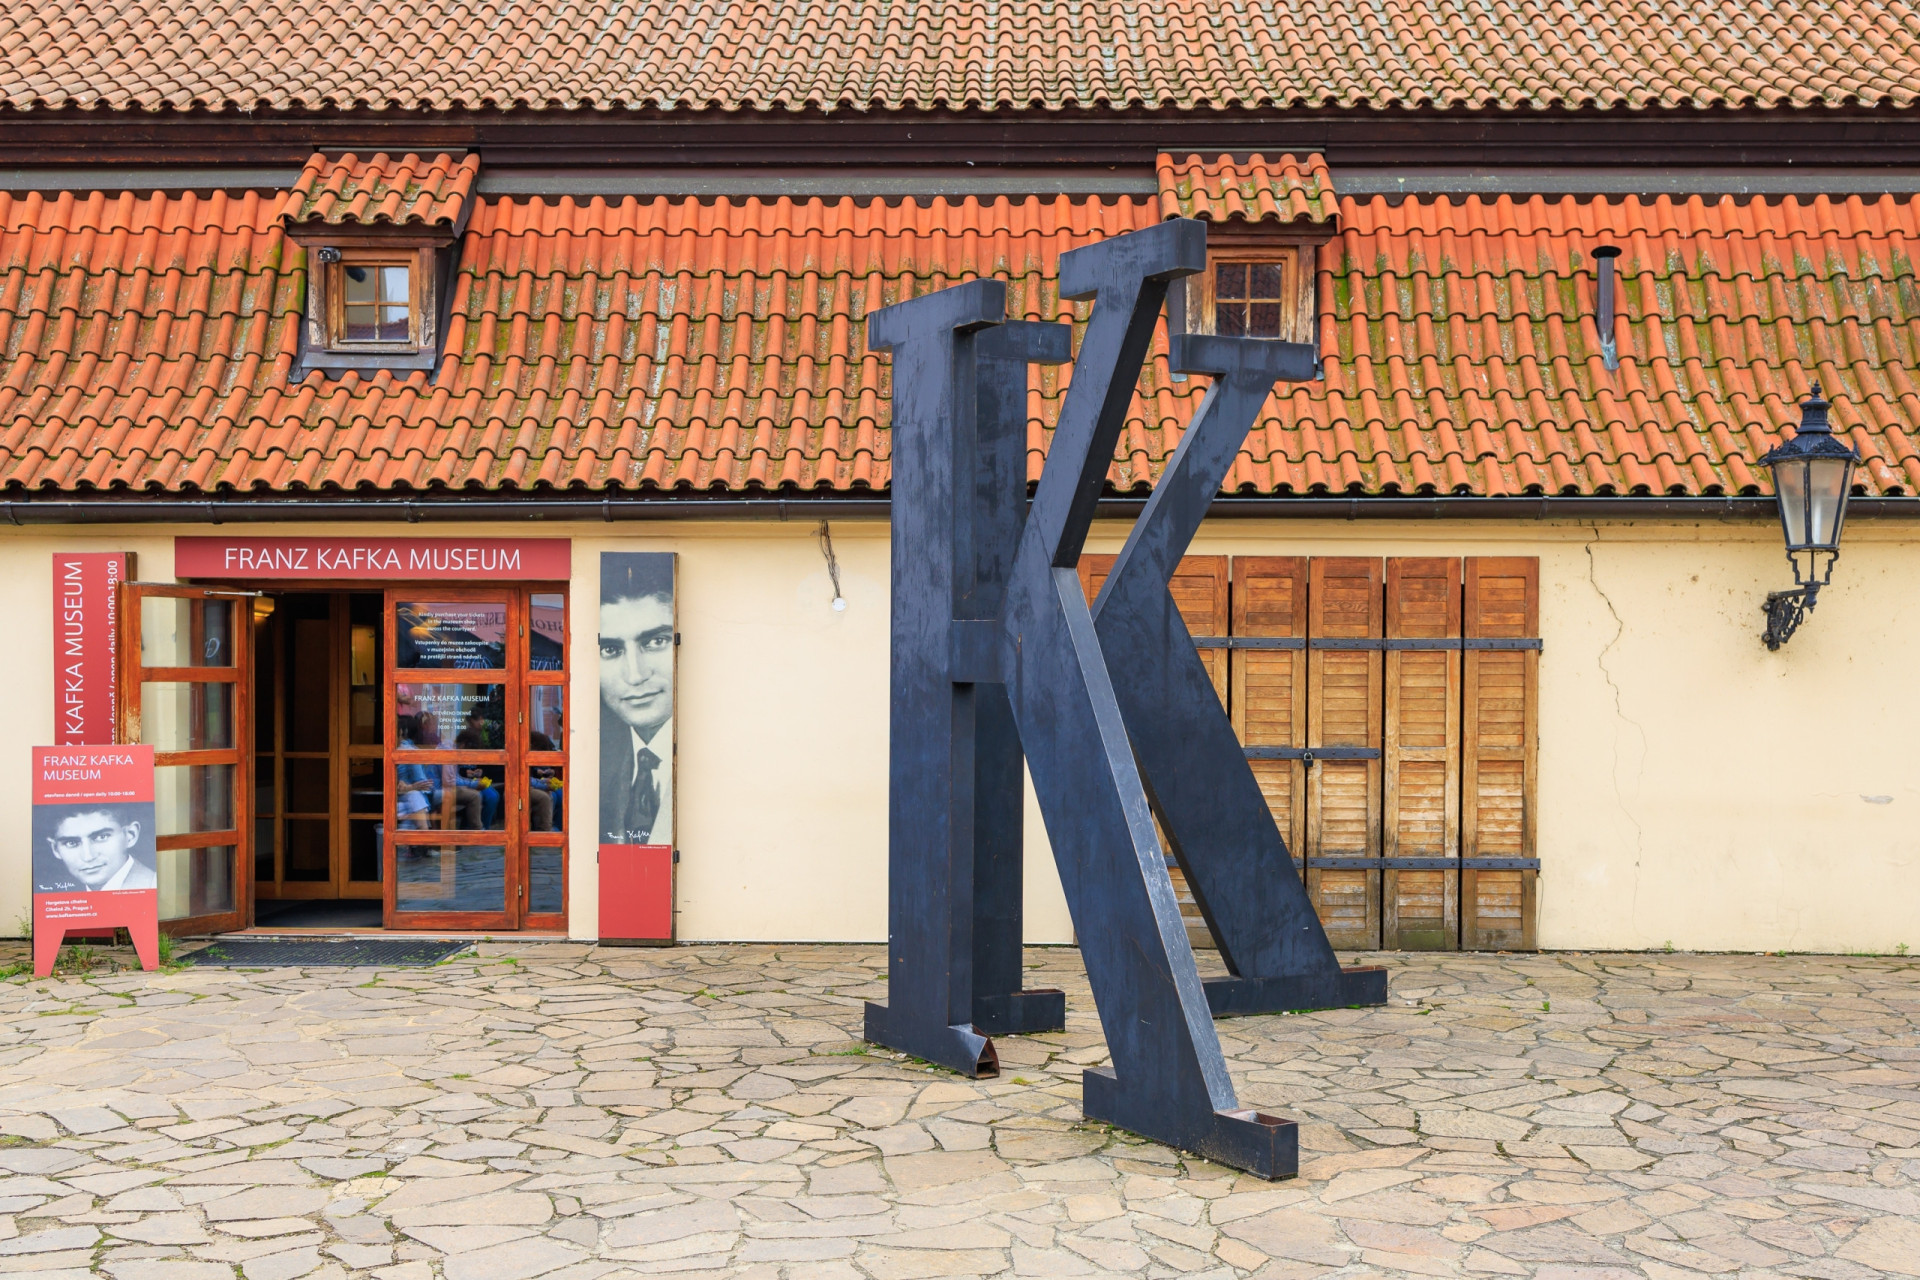 <p>The enigmatic works of Franz Kafka are deeply rooted in Prague's labyrinthine streets and surreal atmosphere. Visitors can explore places like the Kafka Museum and the Old Town Square, gaining insights into the city's role in shaping Kafka's unique literary voice.</p><p><a href="https://www.msn.com/en-us/community/channel/vid-7xx8mnucu55yw63we9va2gwr7uihbxwc68fxqp25x6tg4ftibpra?cvid=94631541bc0f4f89bfd59158d696ad7e">Follow us and access great exclusive content every day</a></p>